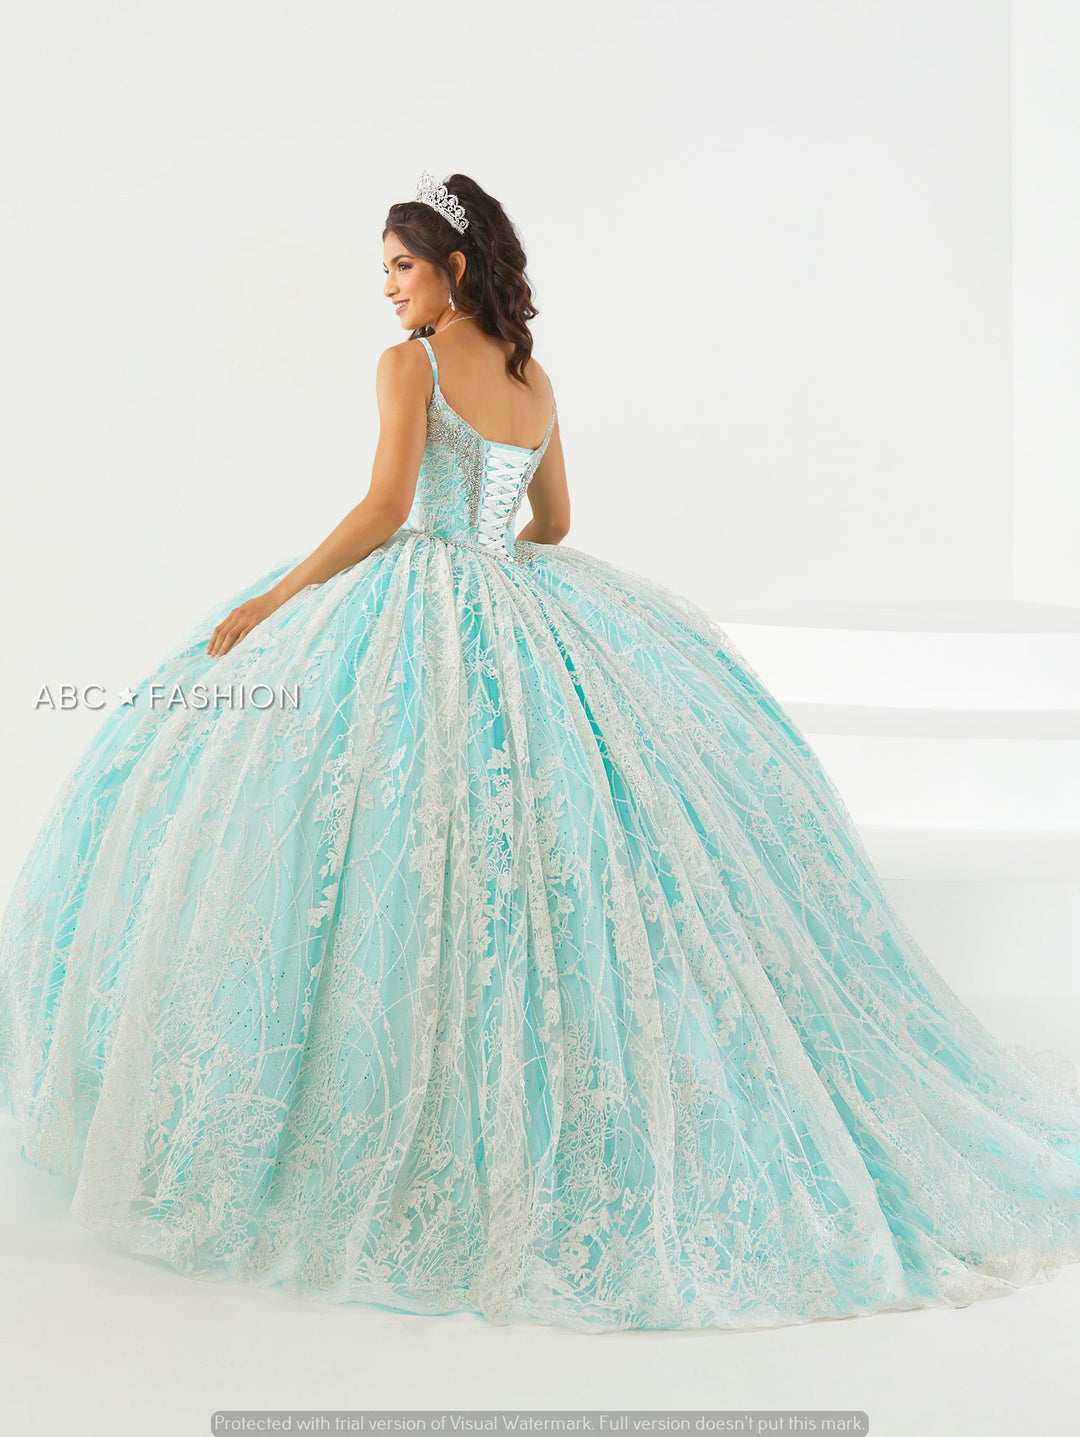 Sleeveless Quinceanera Dress by House of Wu 26003